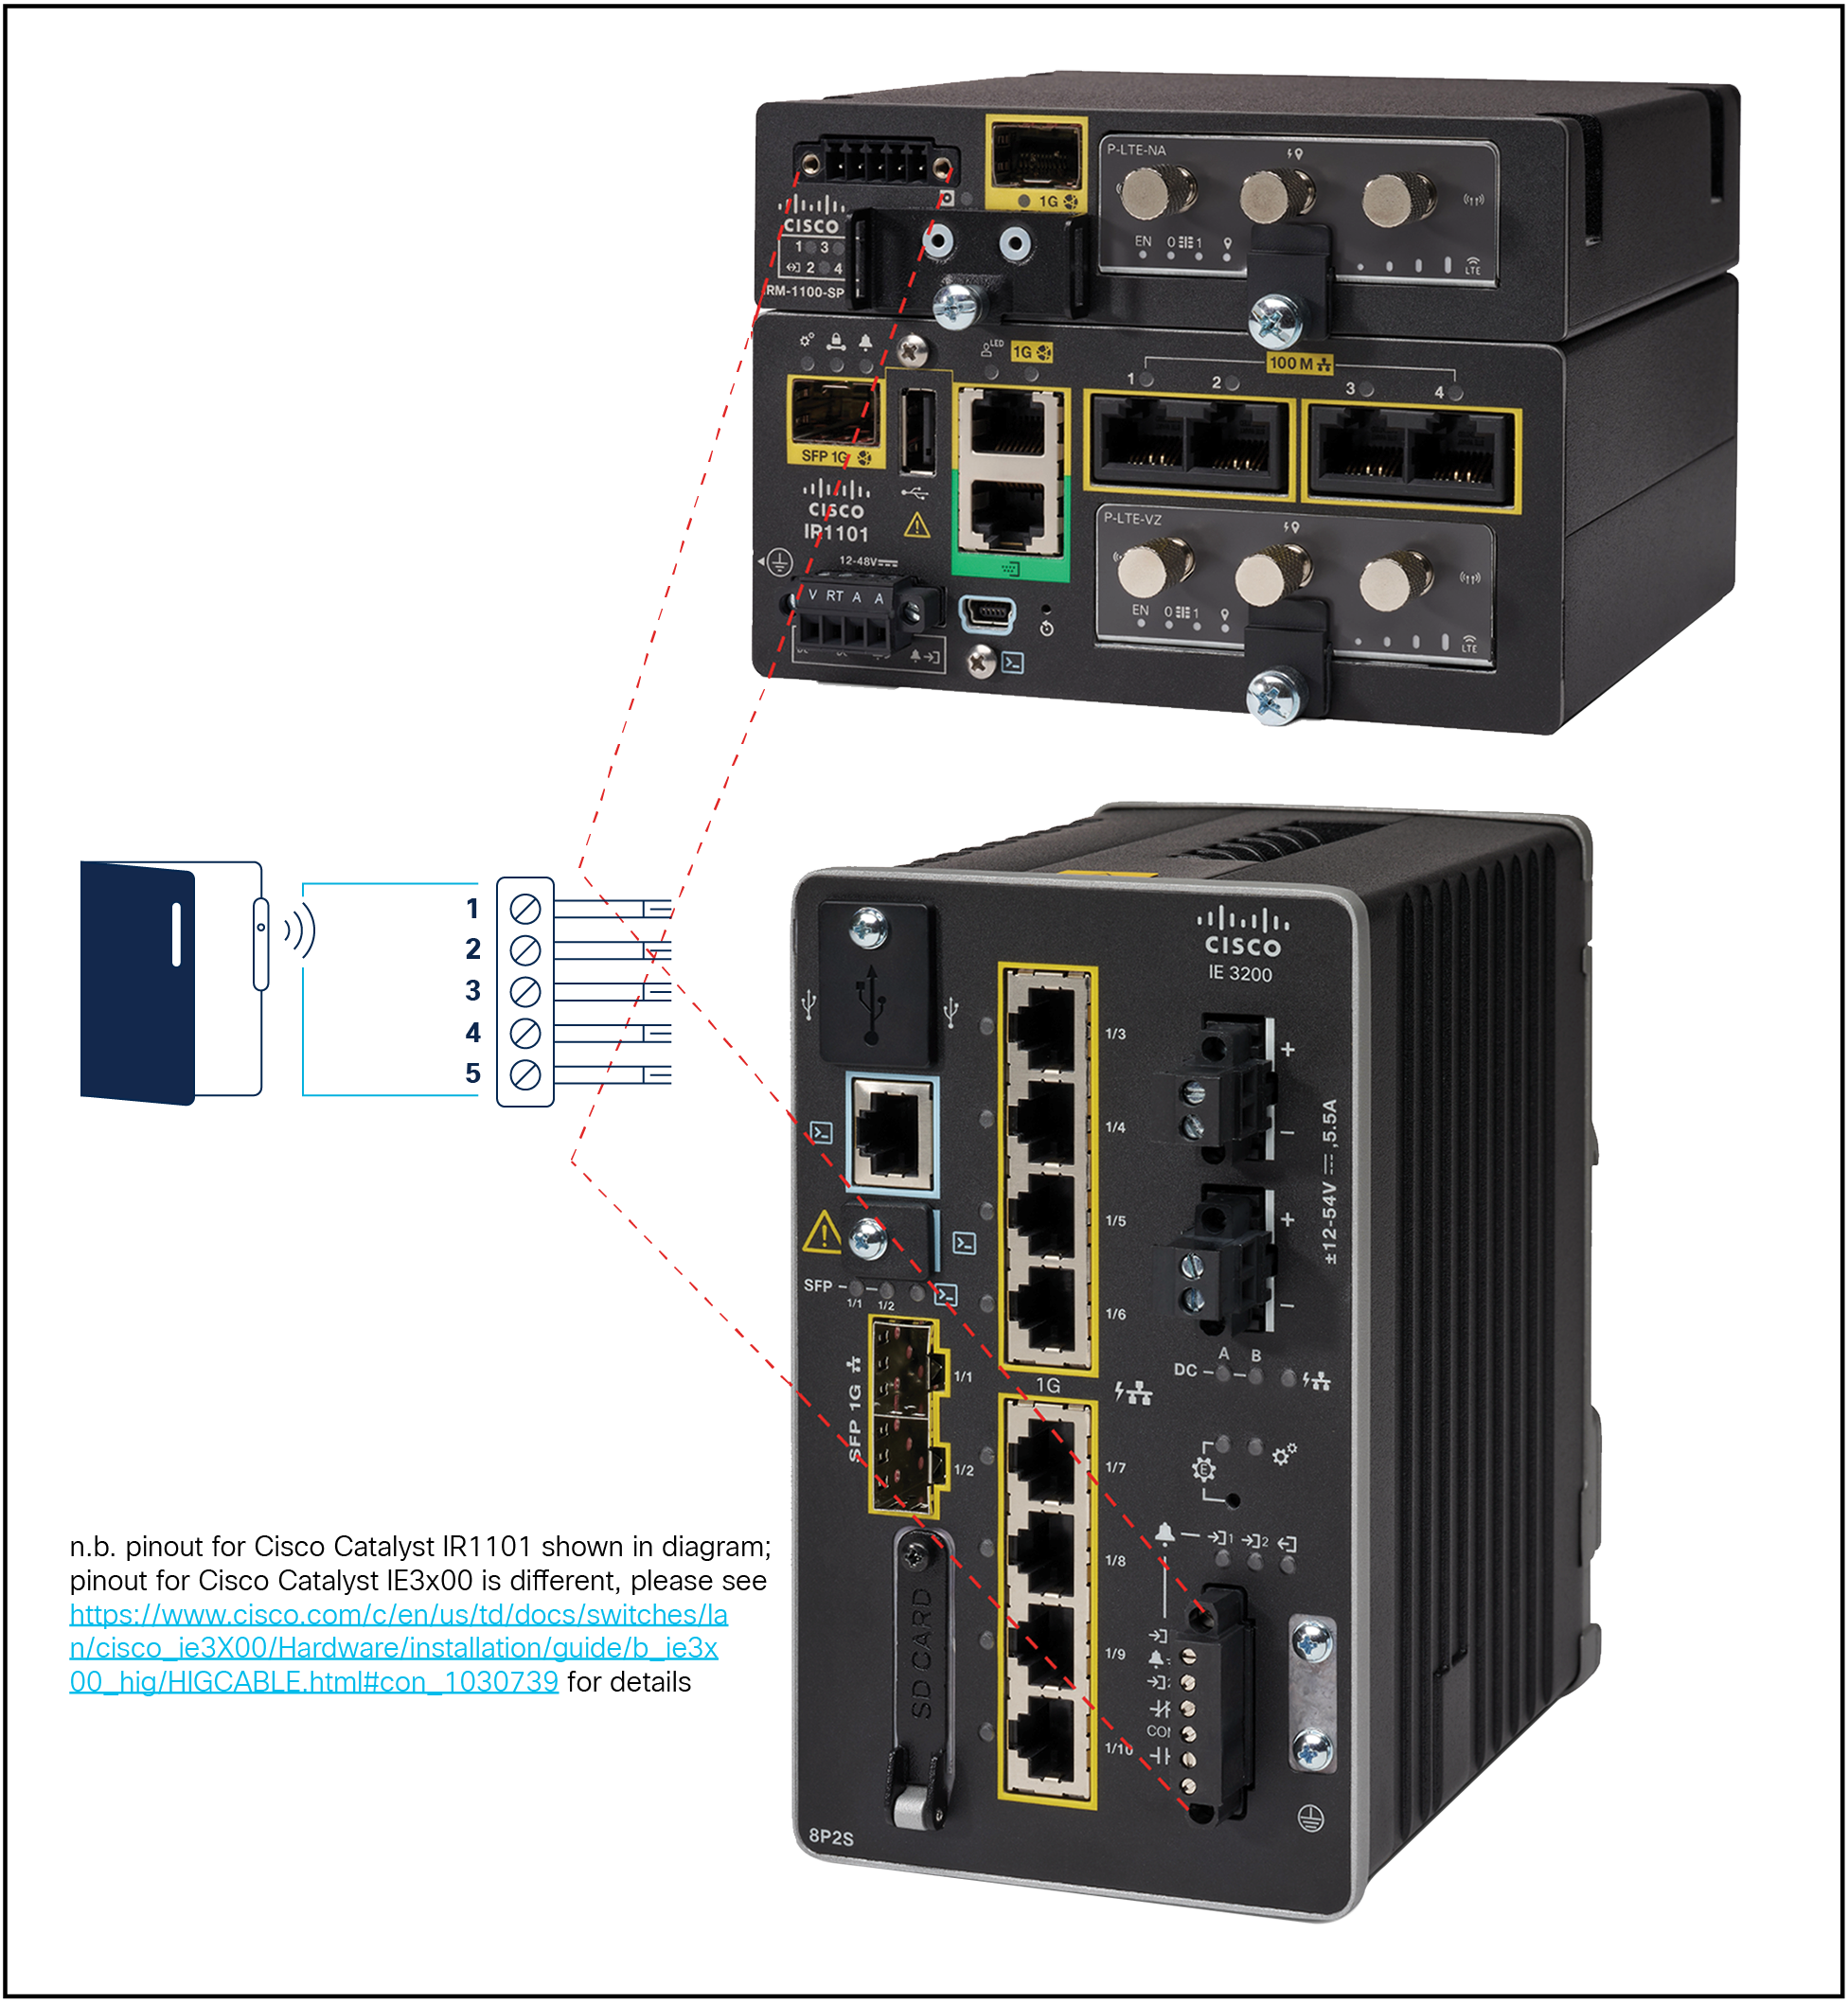 GPIO and alarm ports, on Cisco industrial routers and switches respectively